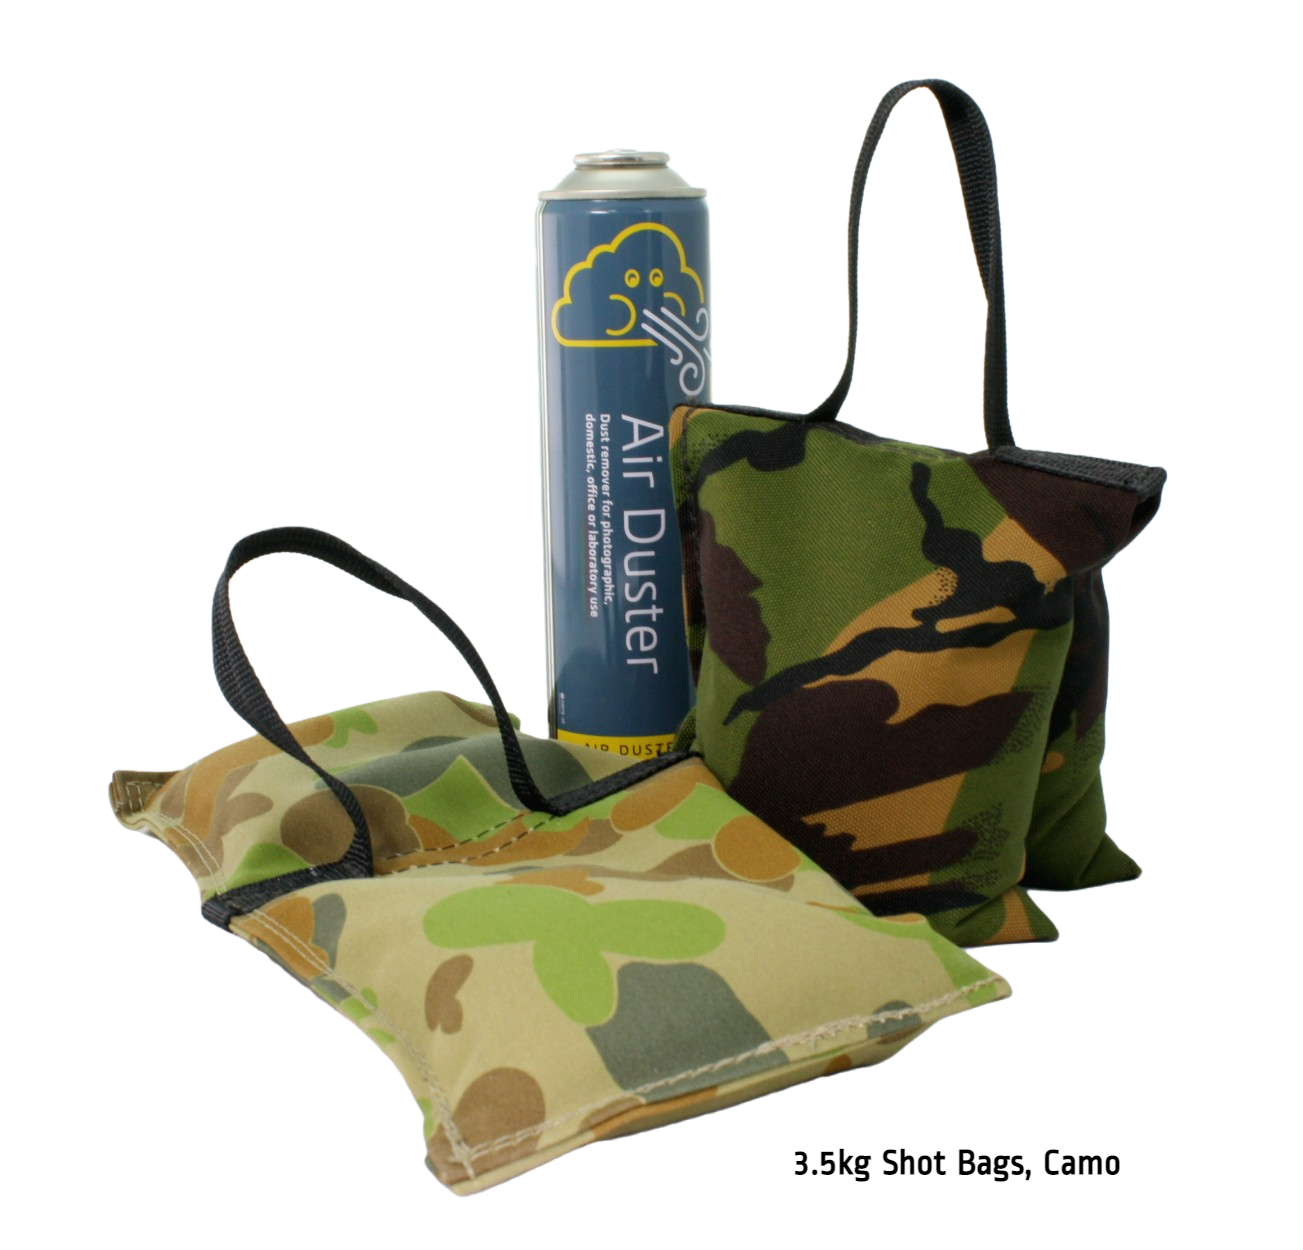 4kg Shot Bags, both camo colours, with a Kenair can for scale